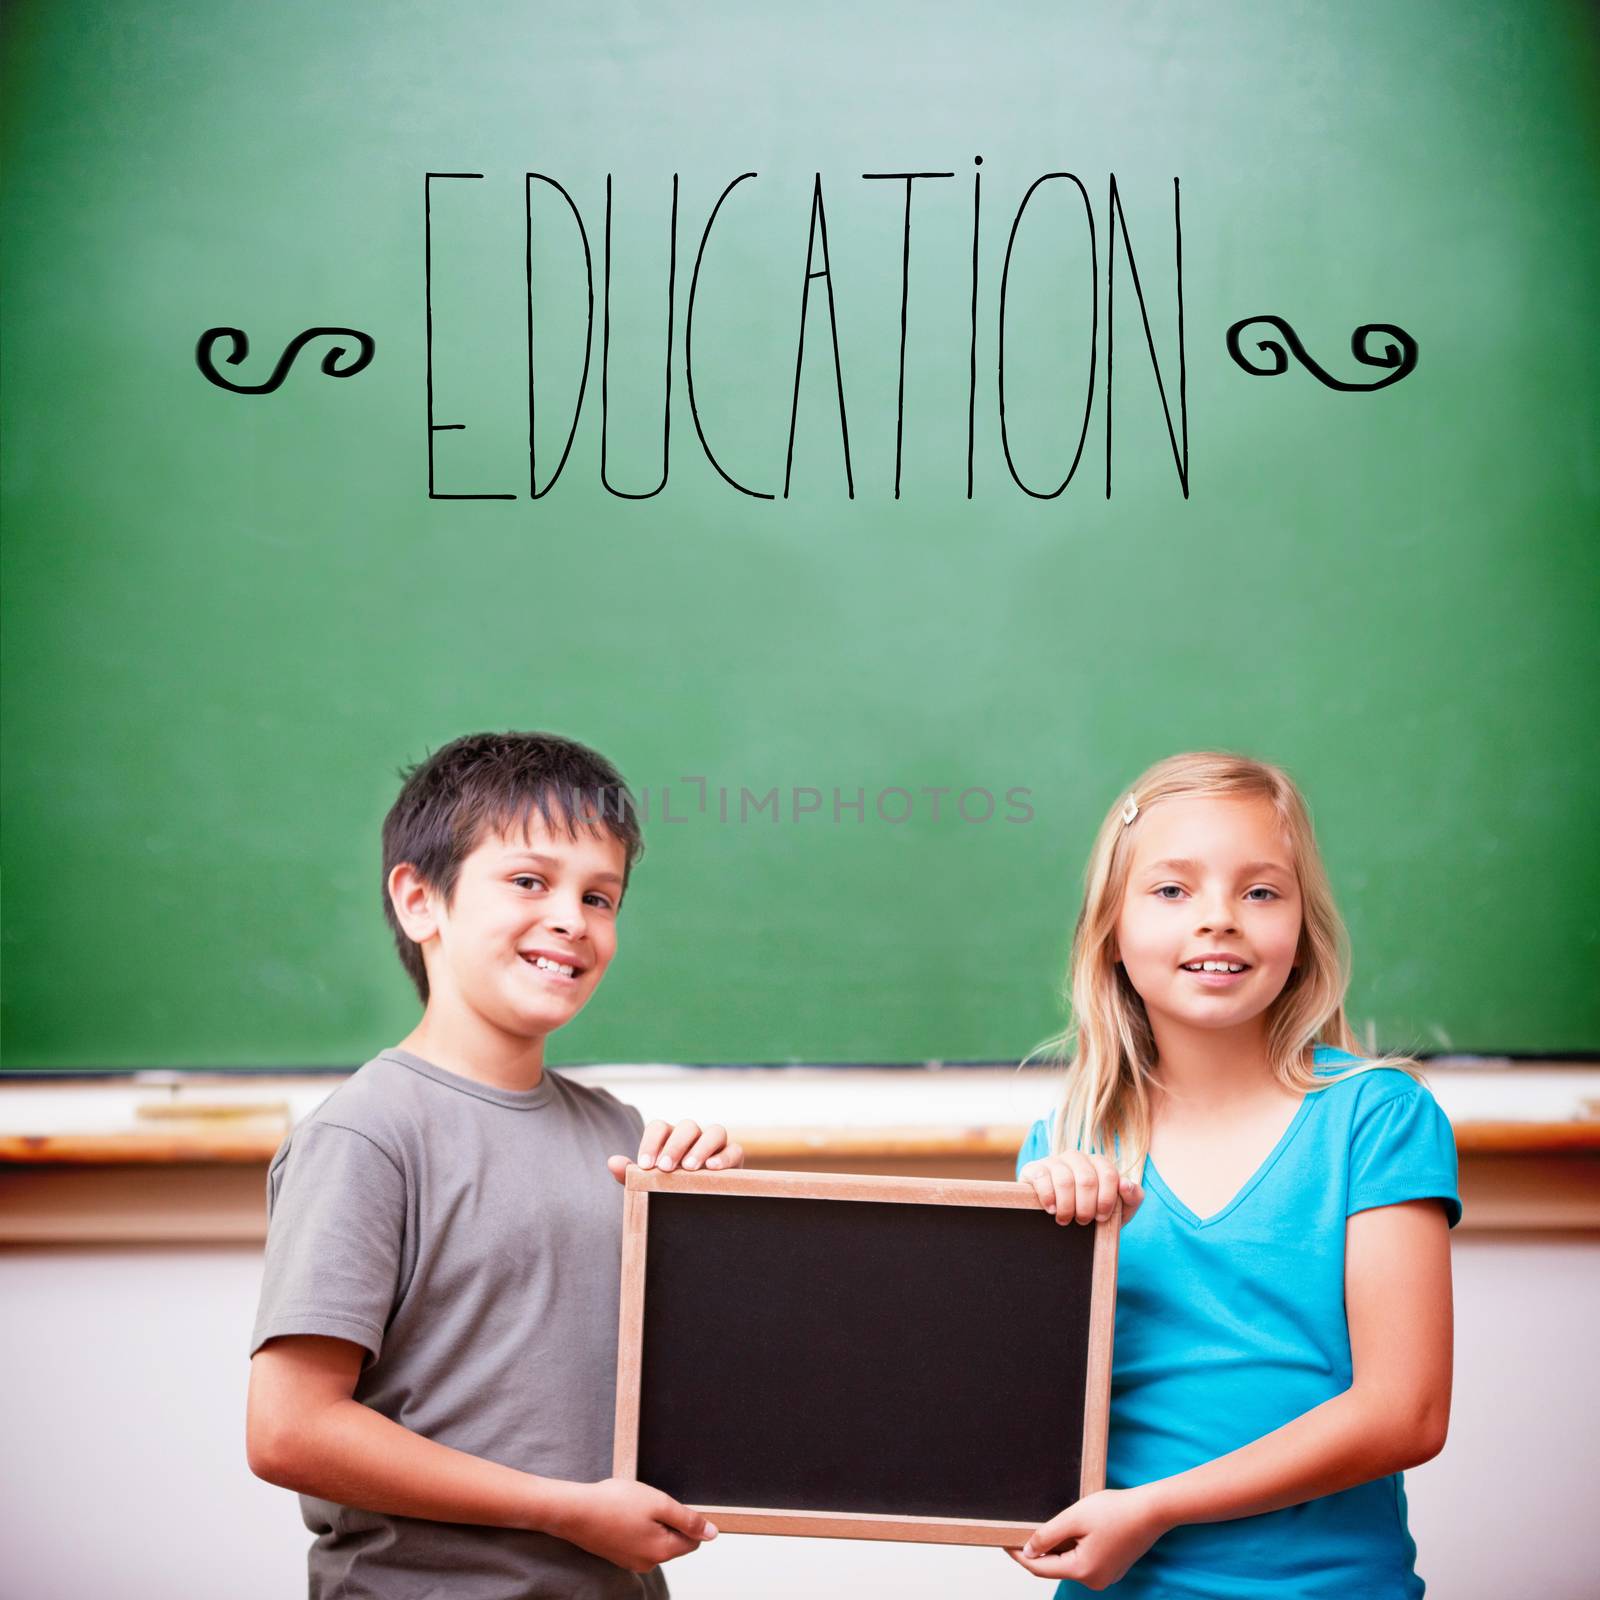 The word education against cute pupils showing chalkboard